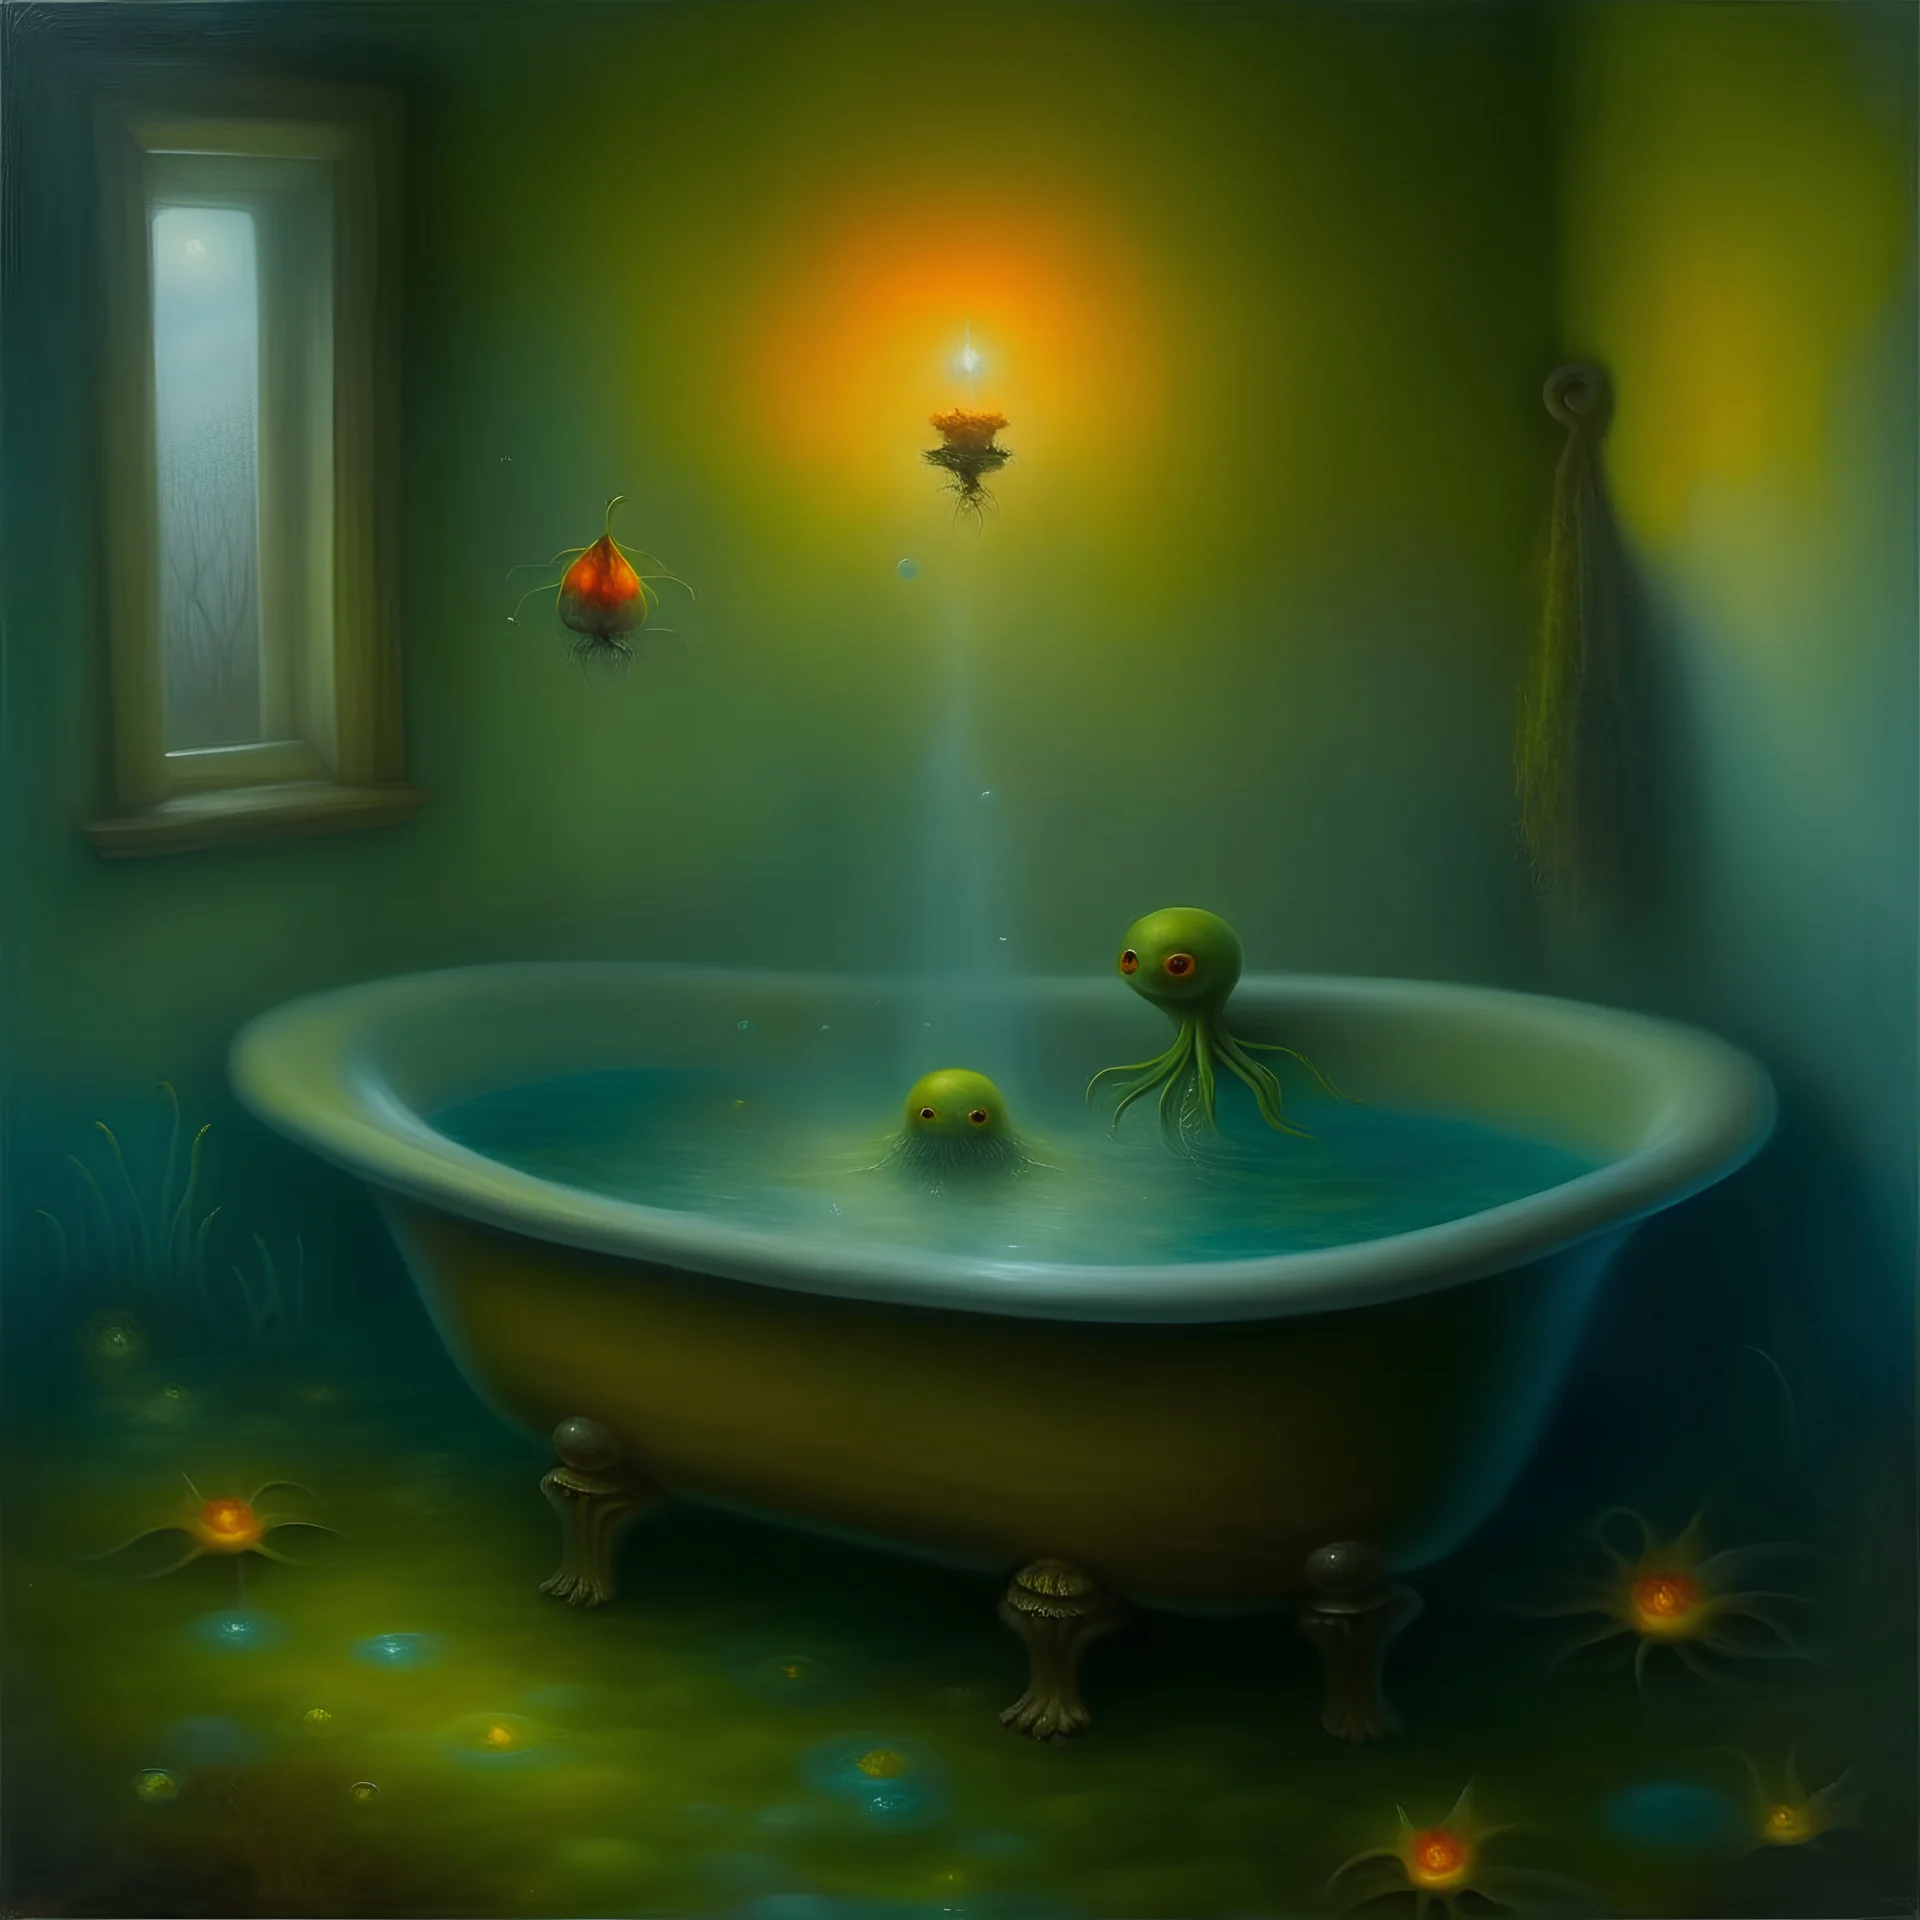 an oil painting of a bathtub in a foggy bathroom with fireflies and aliens